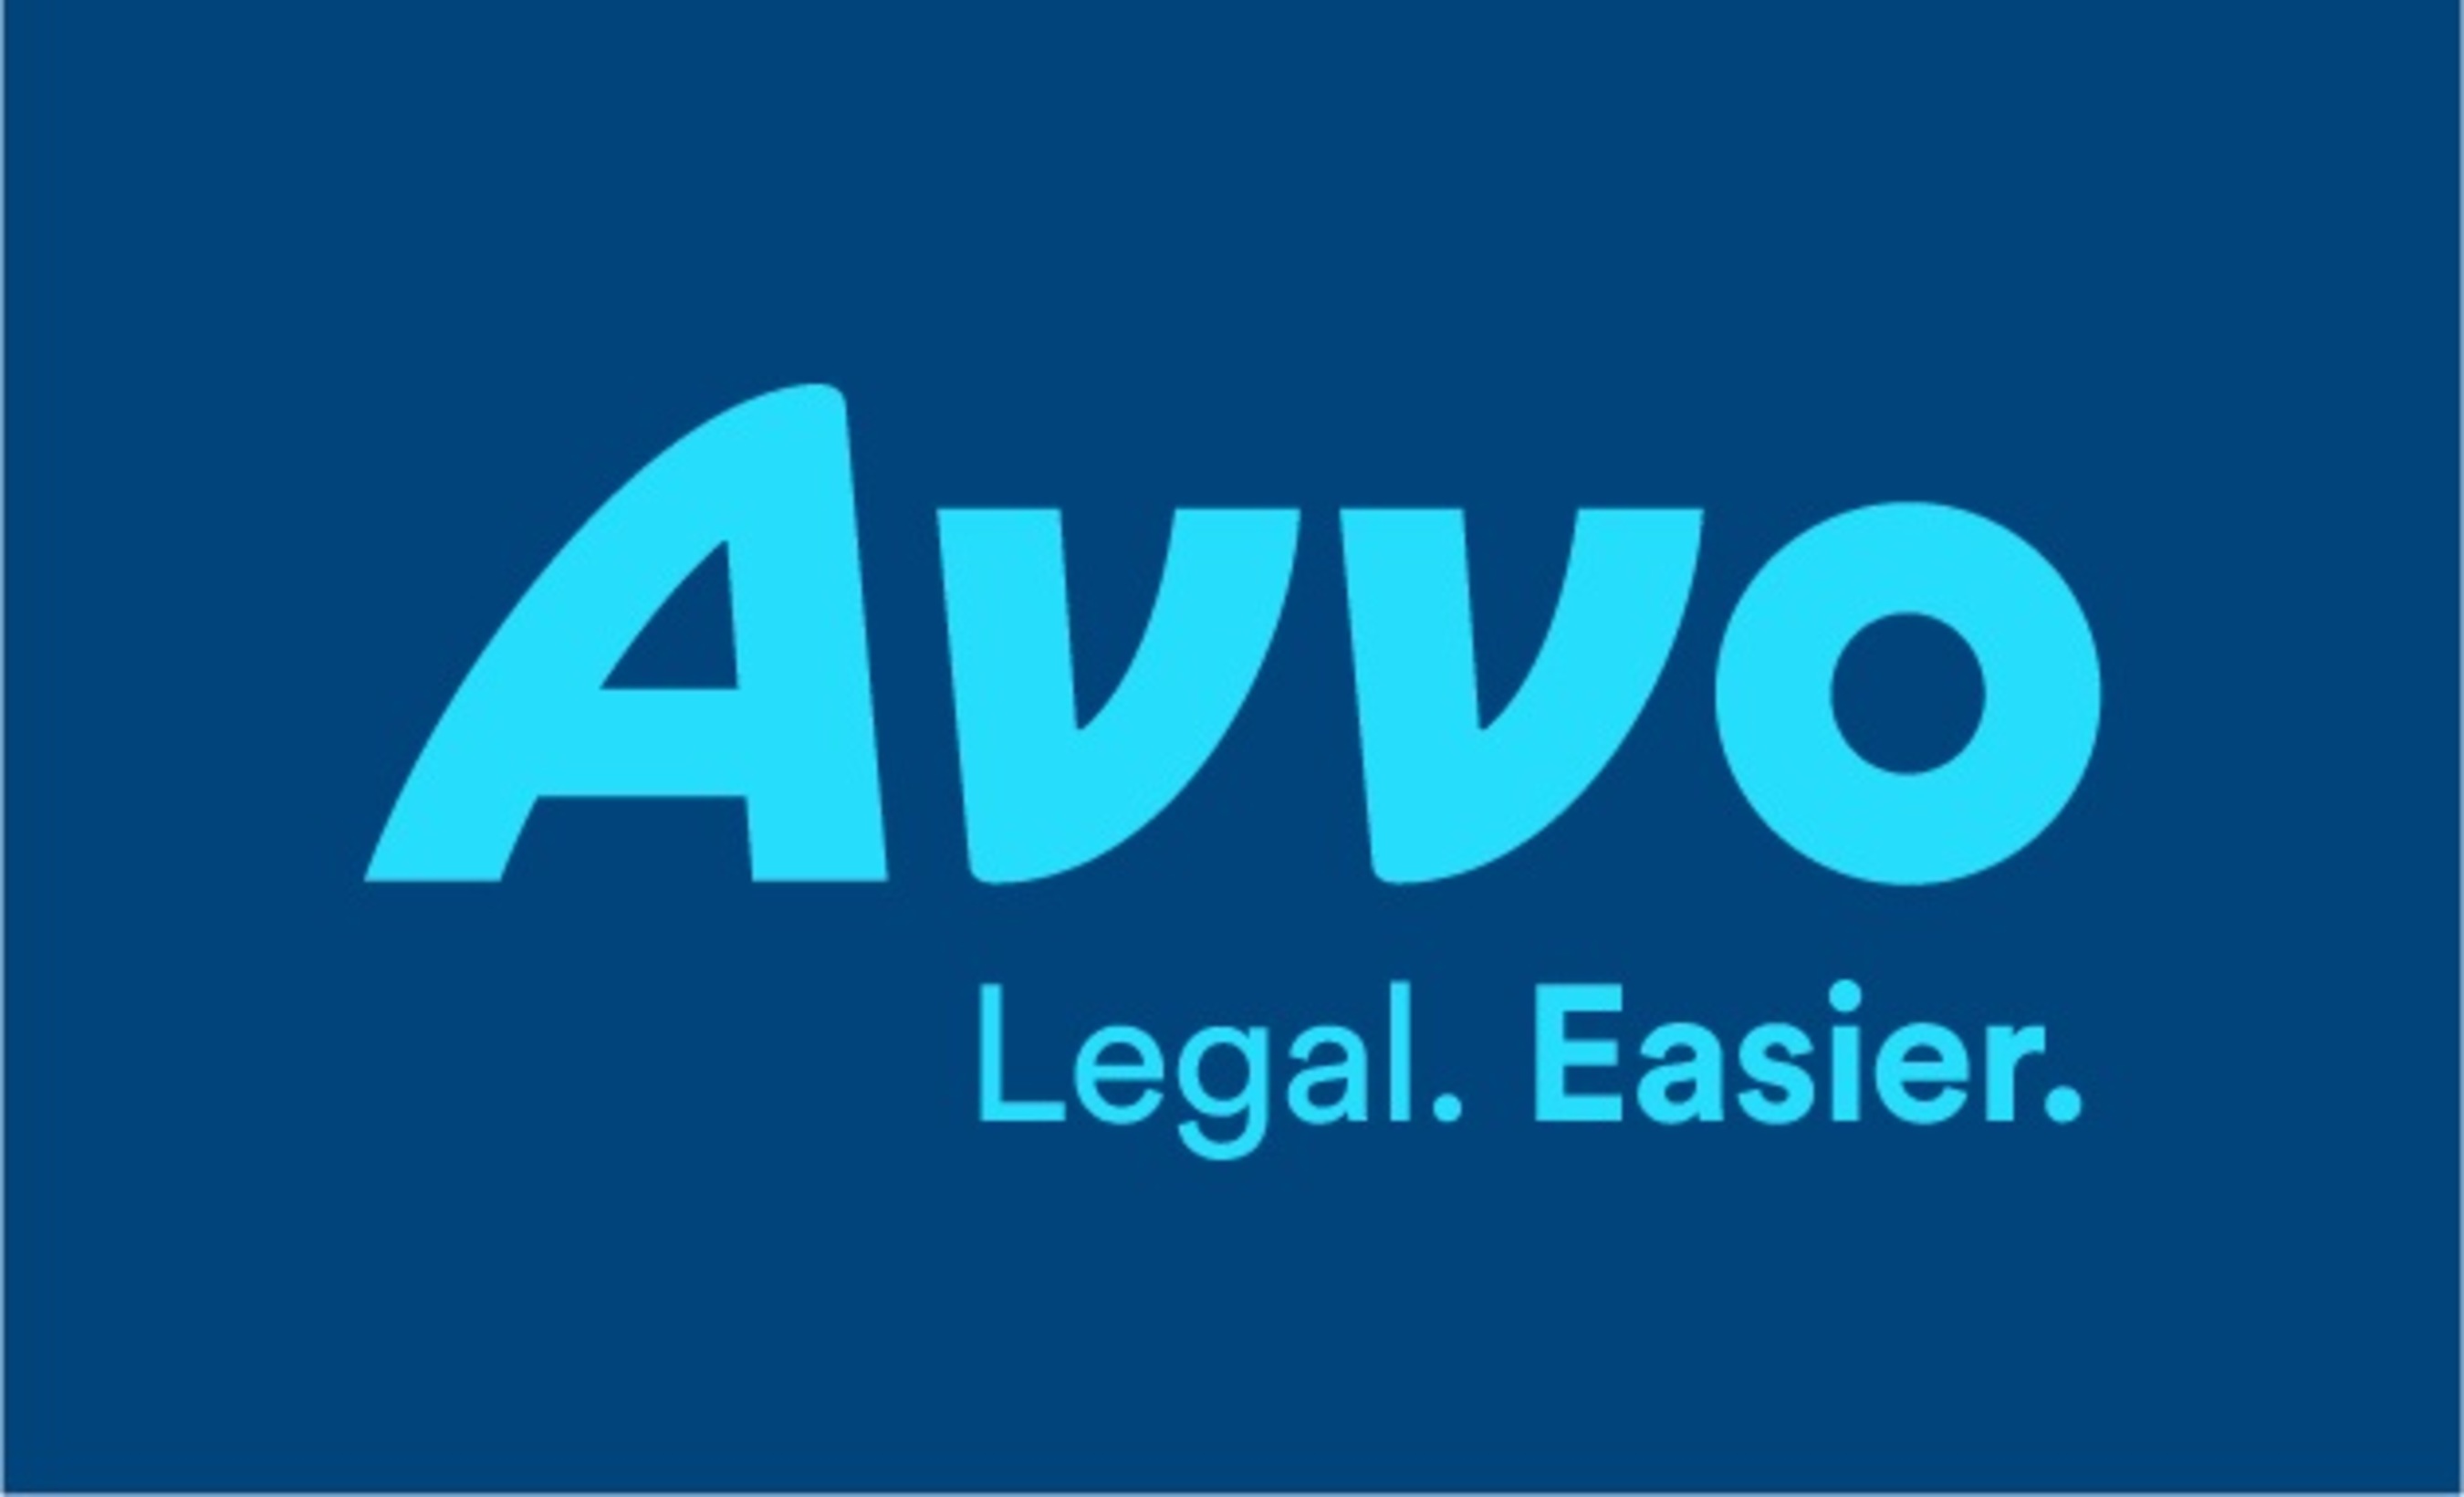 The leading online legal services marketplace connecting consumers and lawyers. (PRNewsFoto/Avvo, Inc.) (PRNewsFoto/Avvo, Inc.)